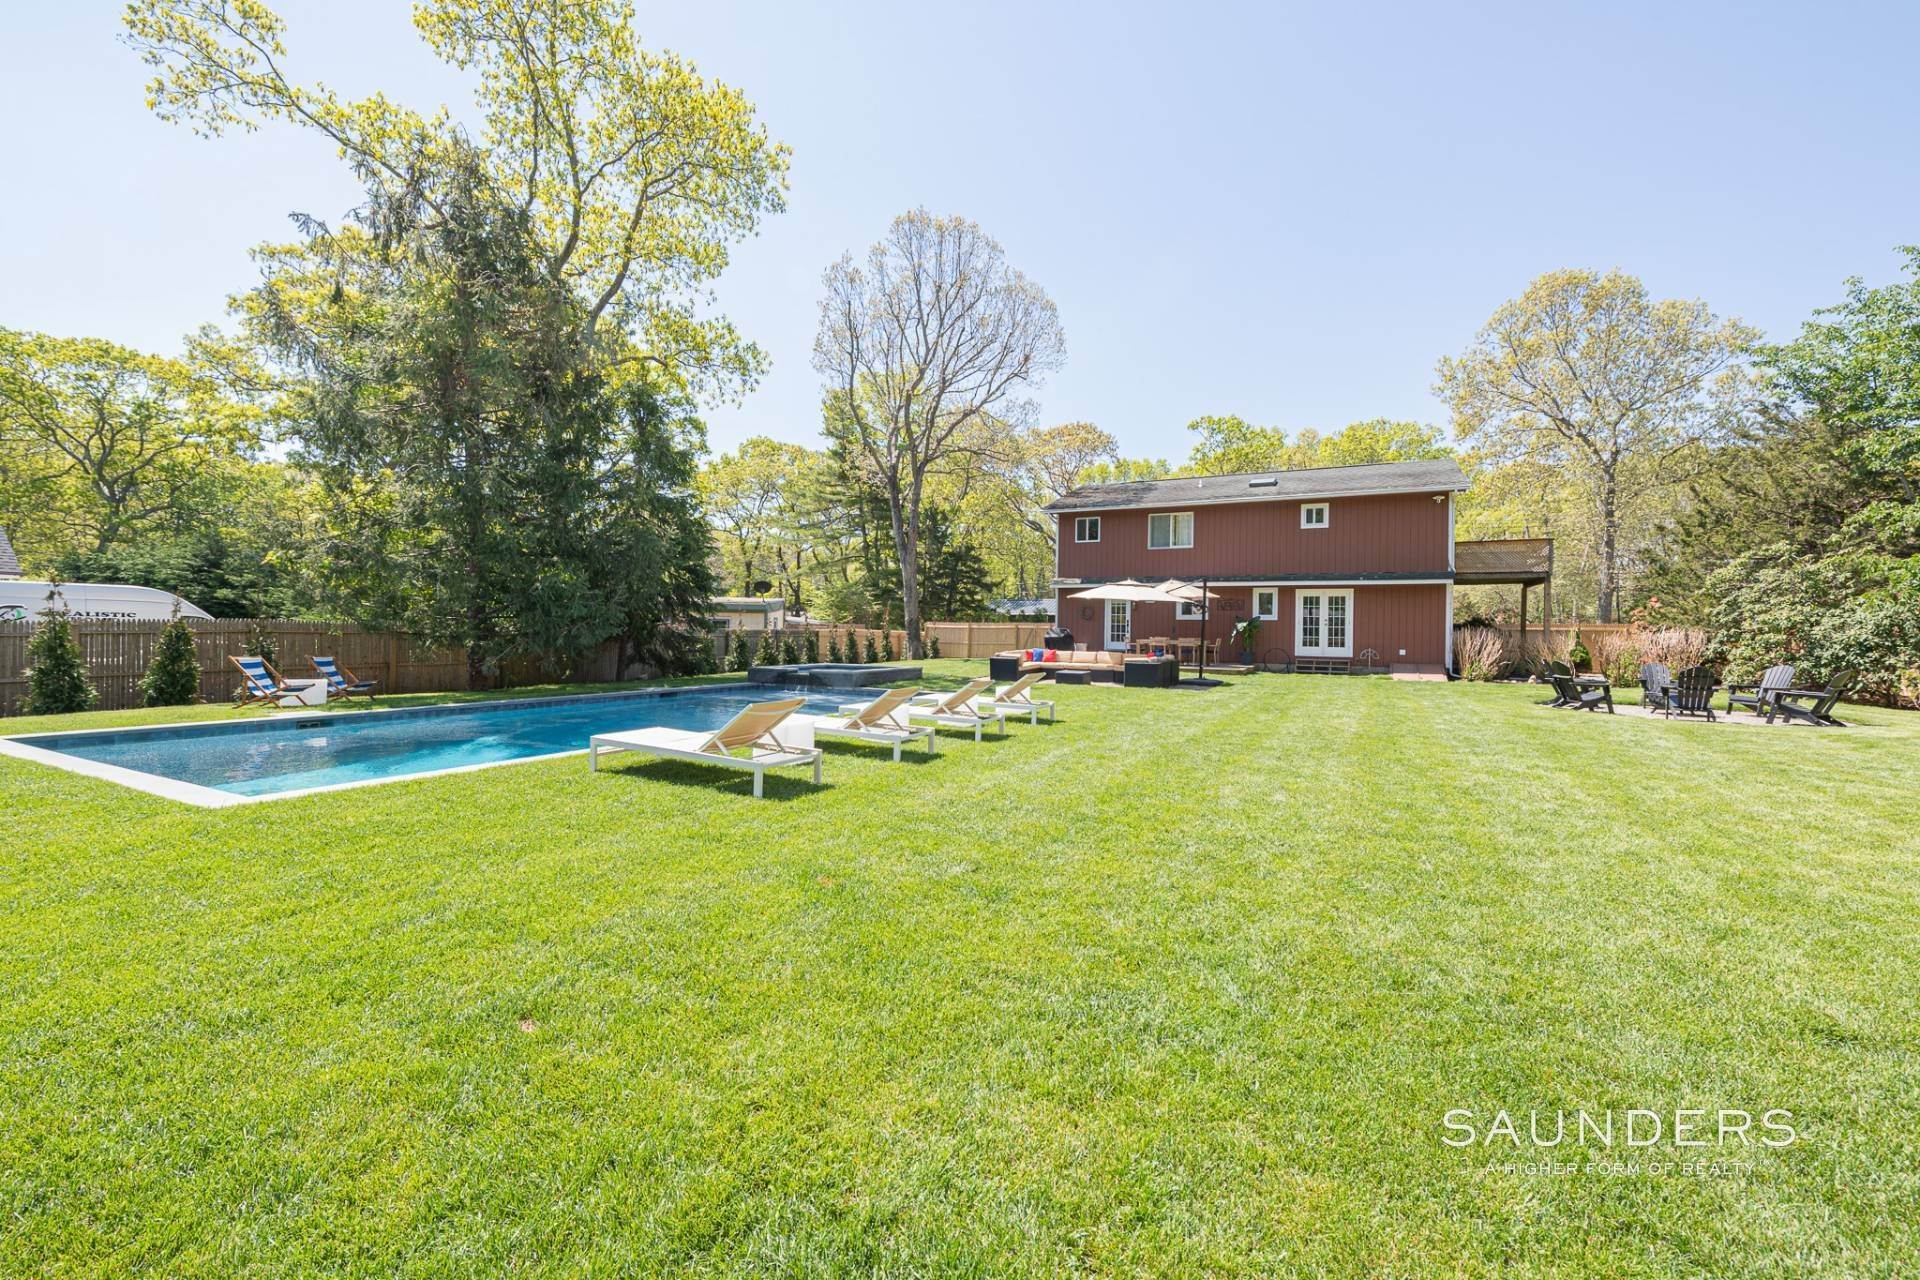 Single Family Homes at Newly Renovated 4 Bedroom With Pool And Spa! 55 Fort Pond Boulevard, East Hampton, NY 11937